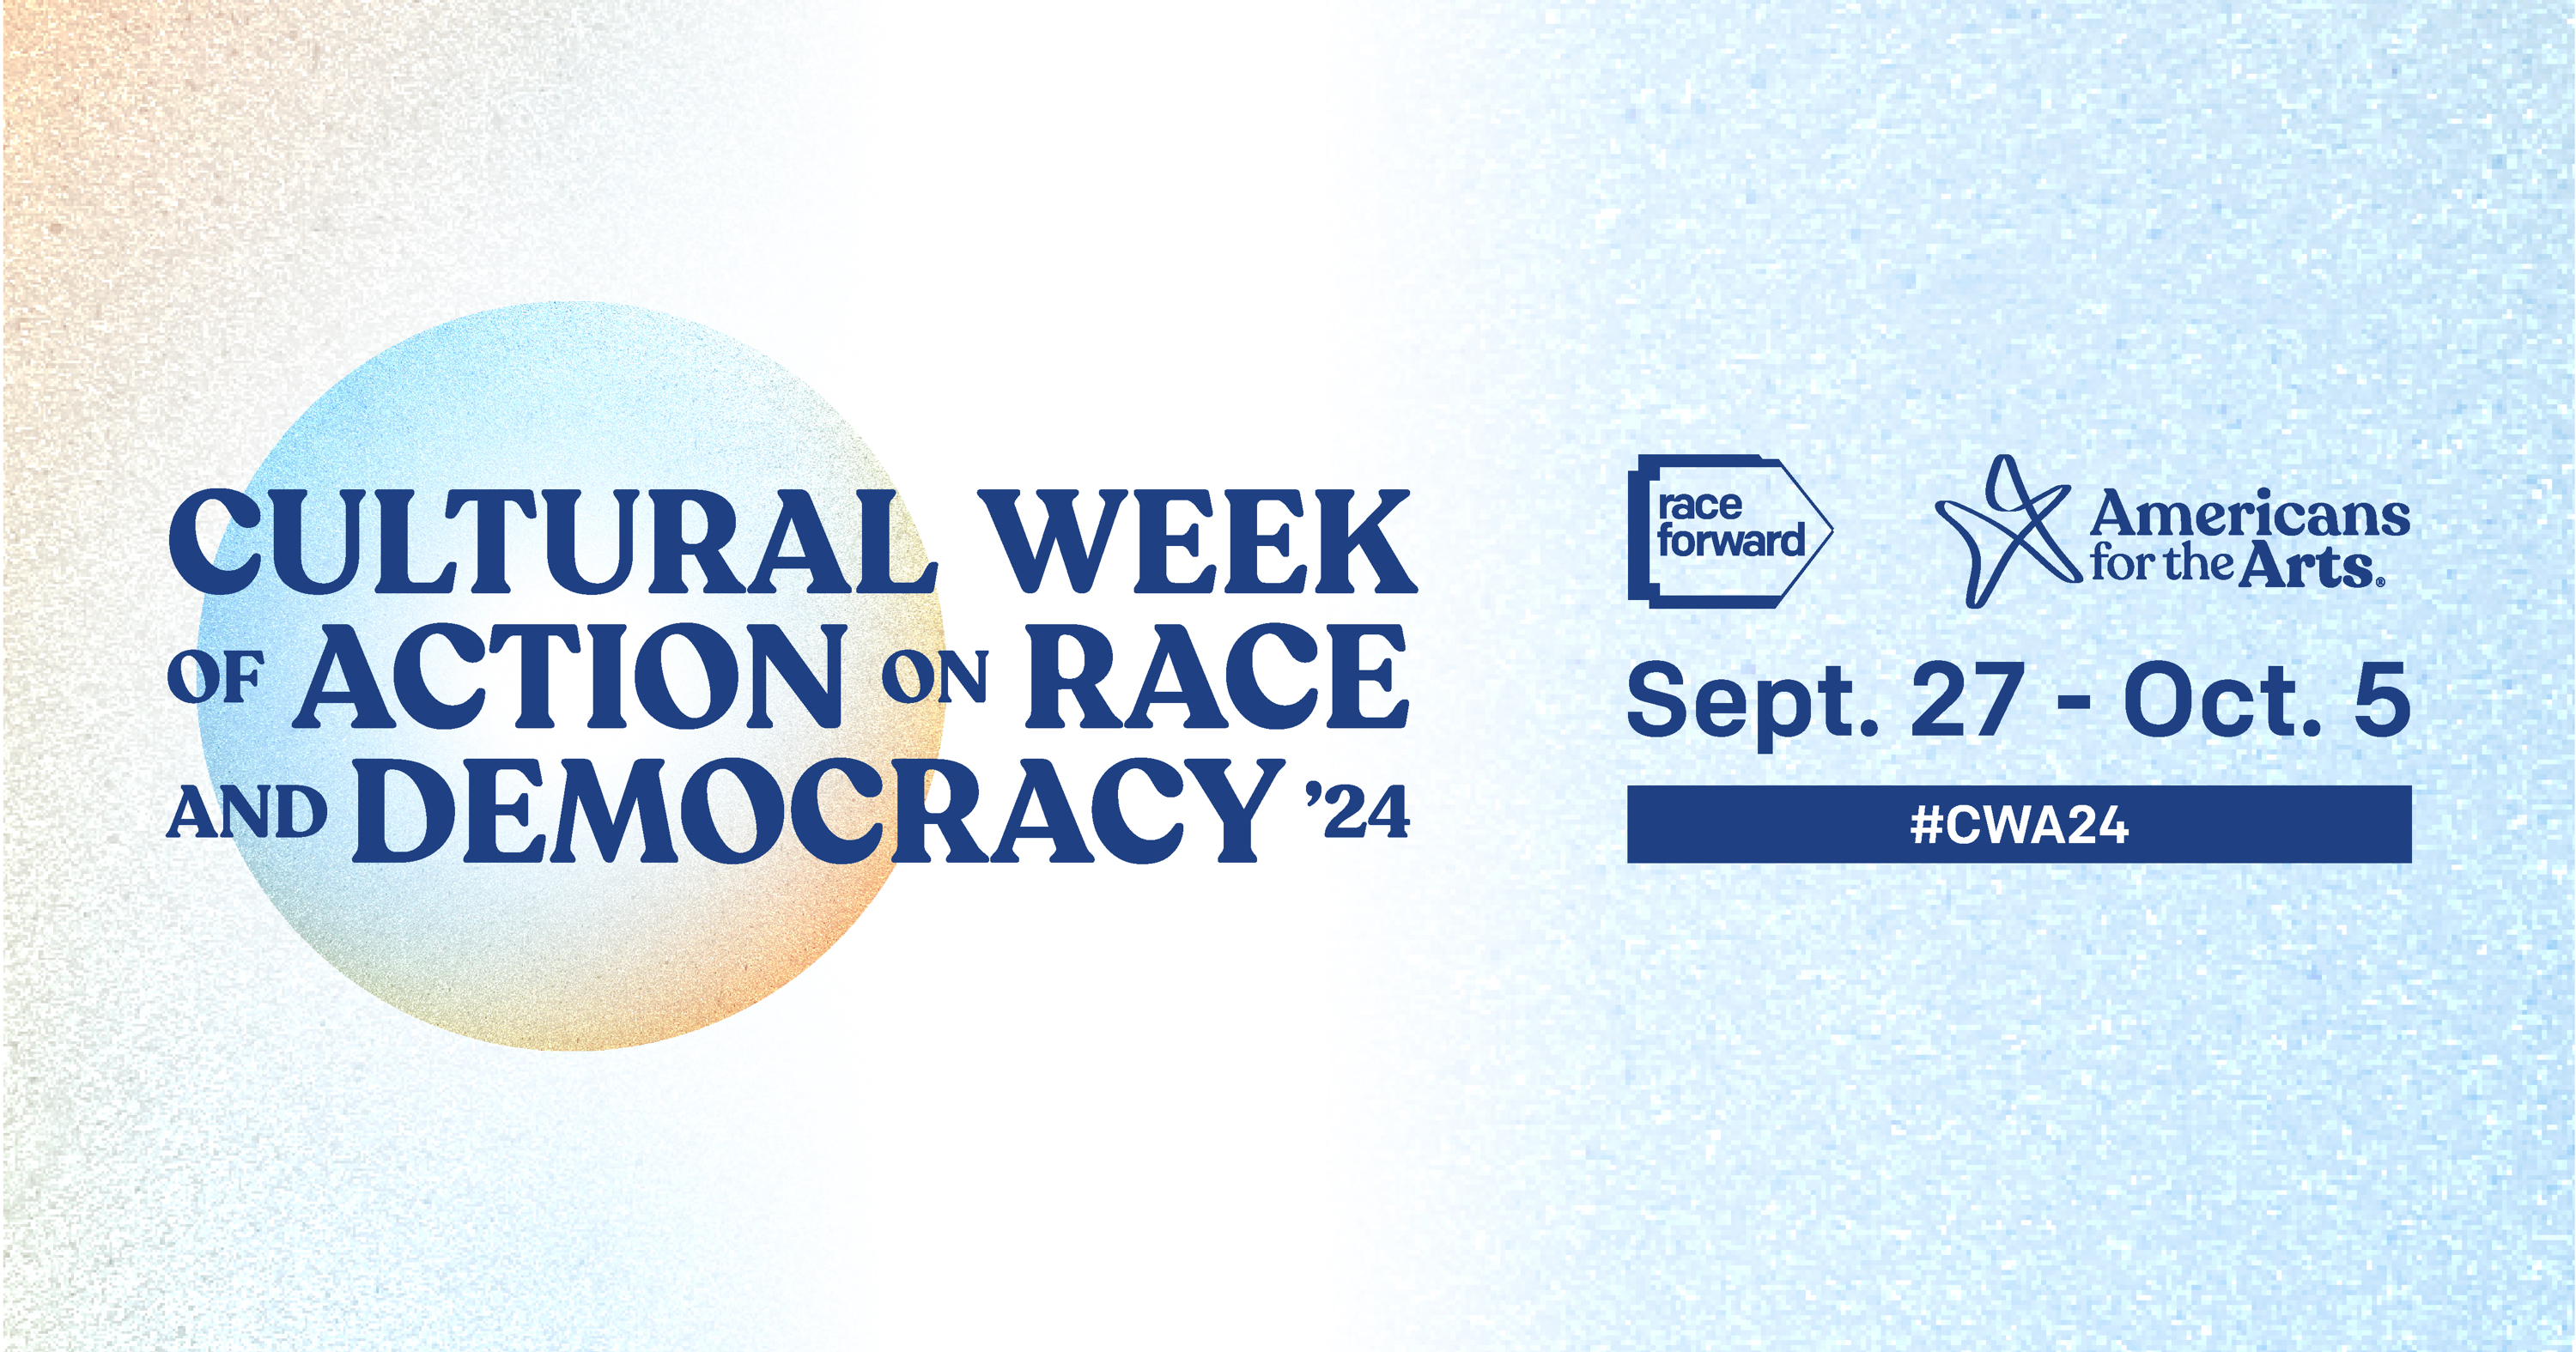 Cultural Week of Action on Race and Democracy '24 with Race Forward and Americans for the Arts logos to the right. Sept. 27 - Oct. 5. #CWA24